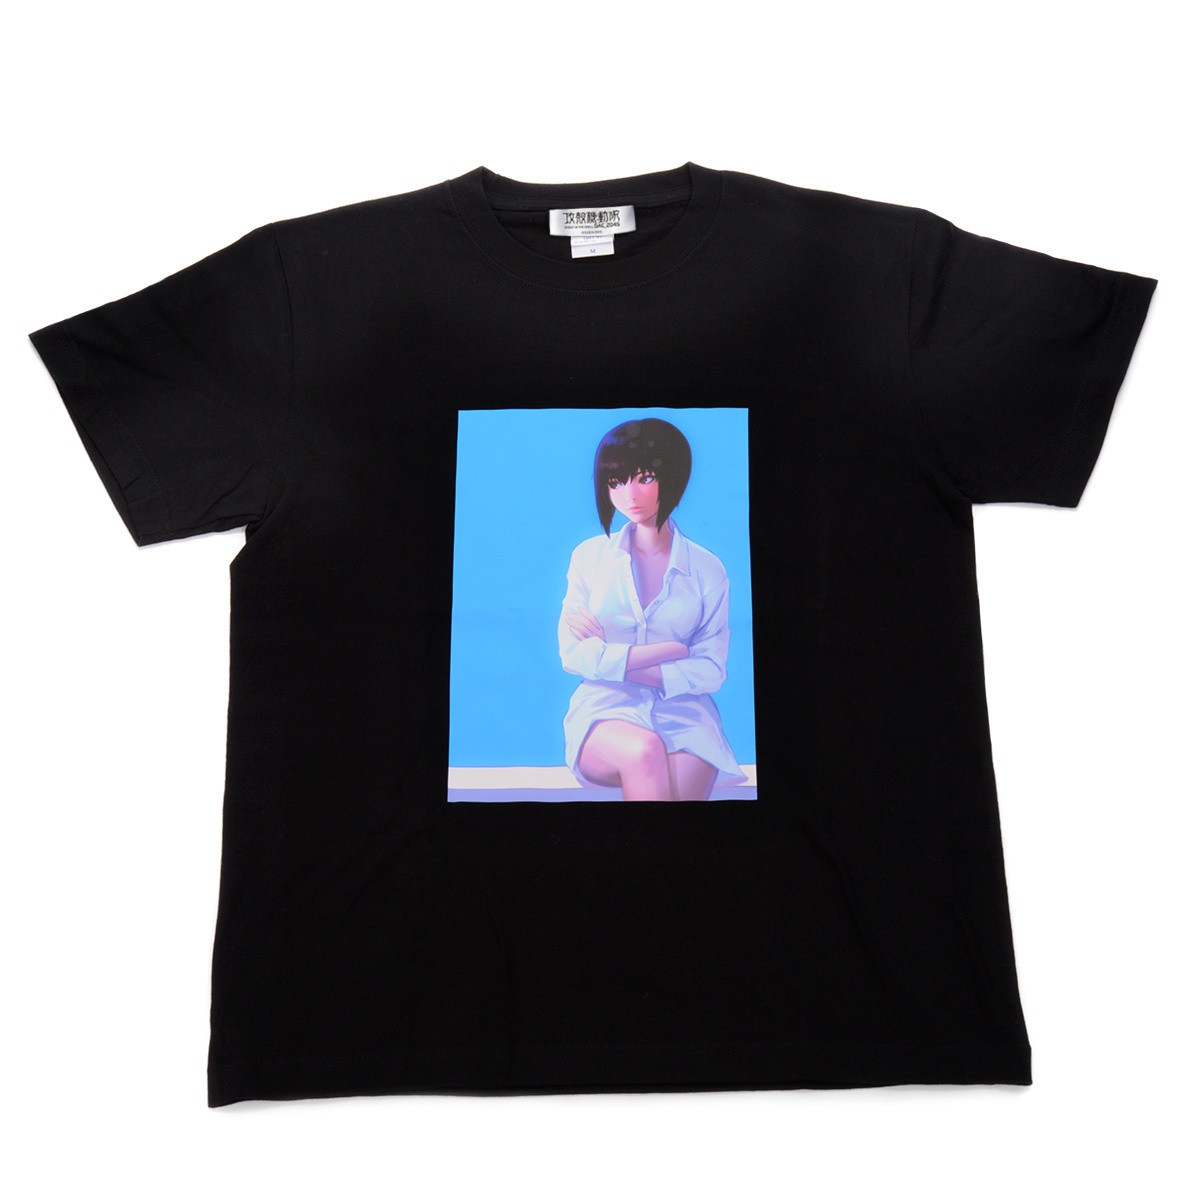 Ghost in the Shell SAC_2045 T-Shirt